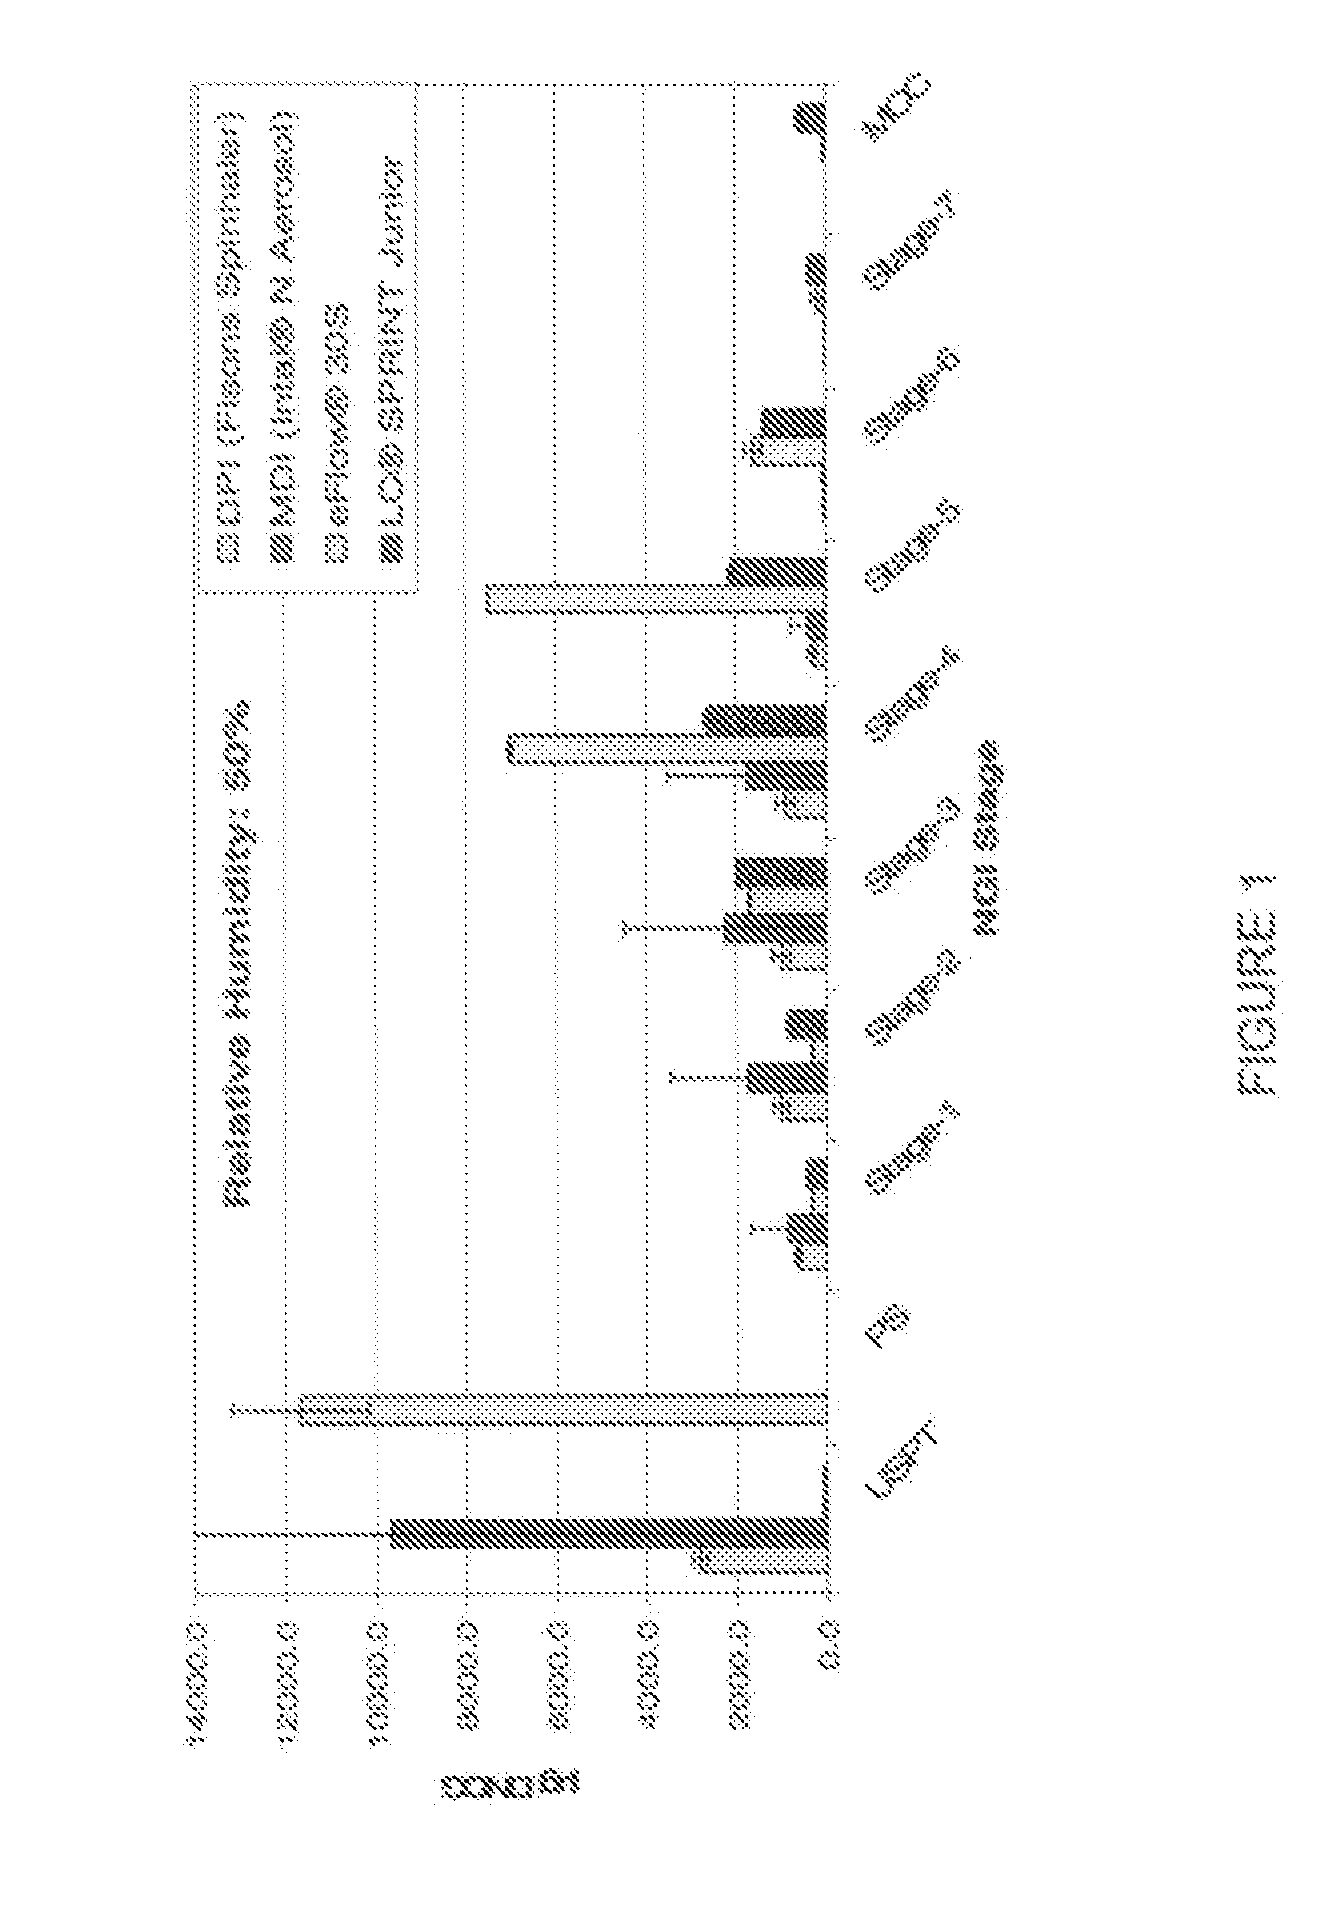 Disodium cromoglycate compositions and methods for administering same